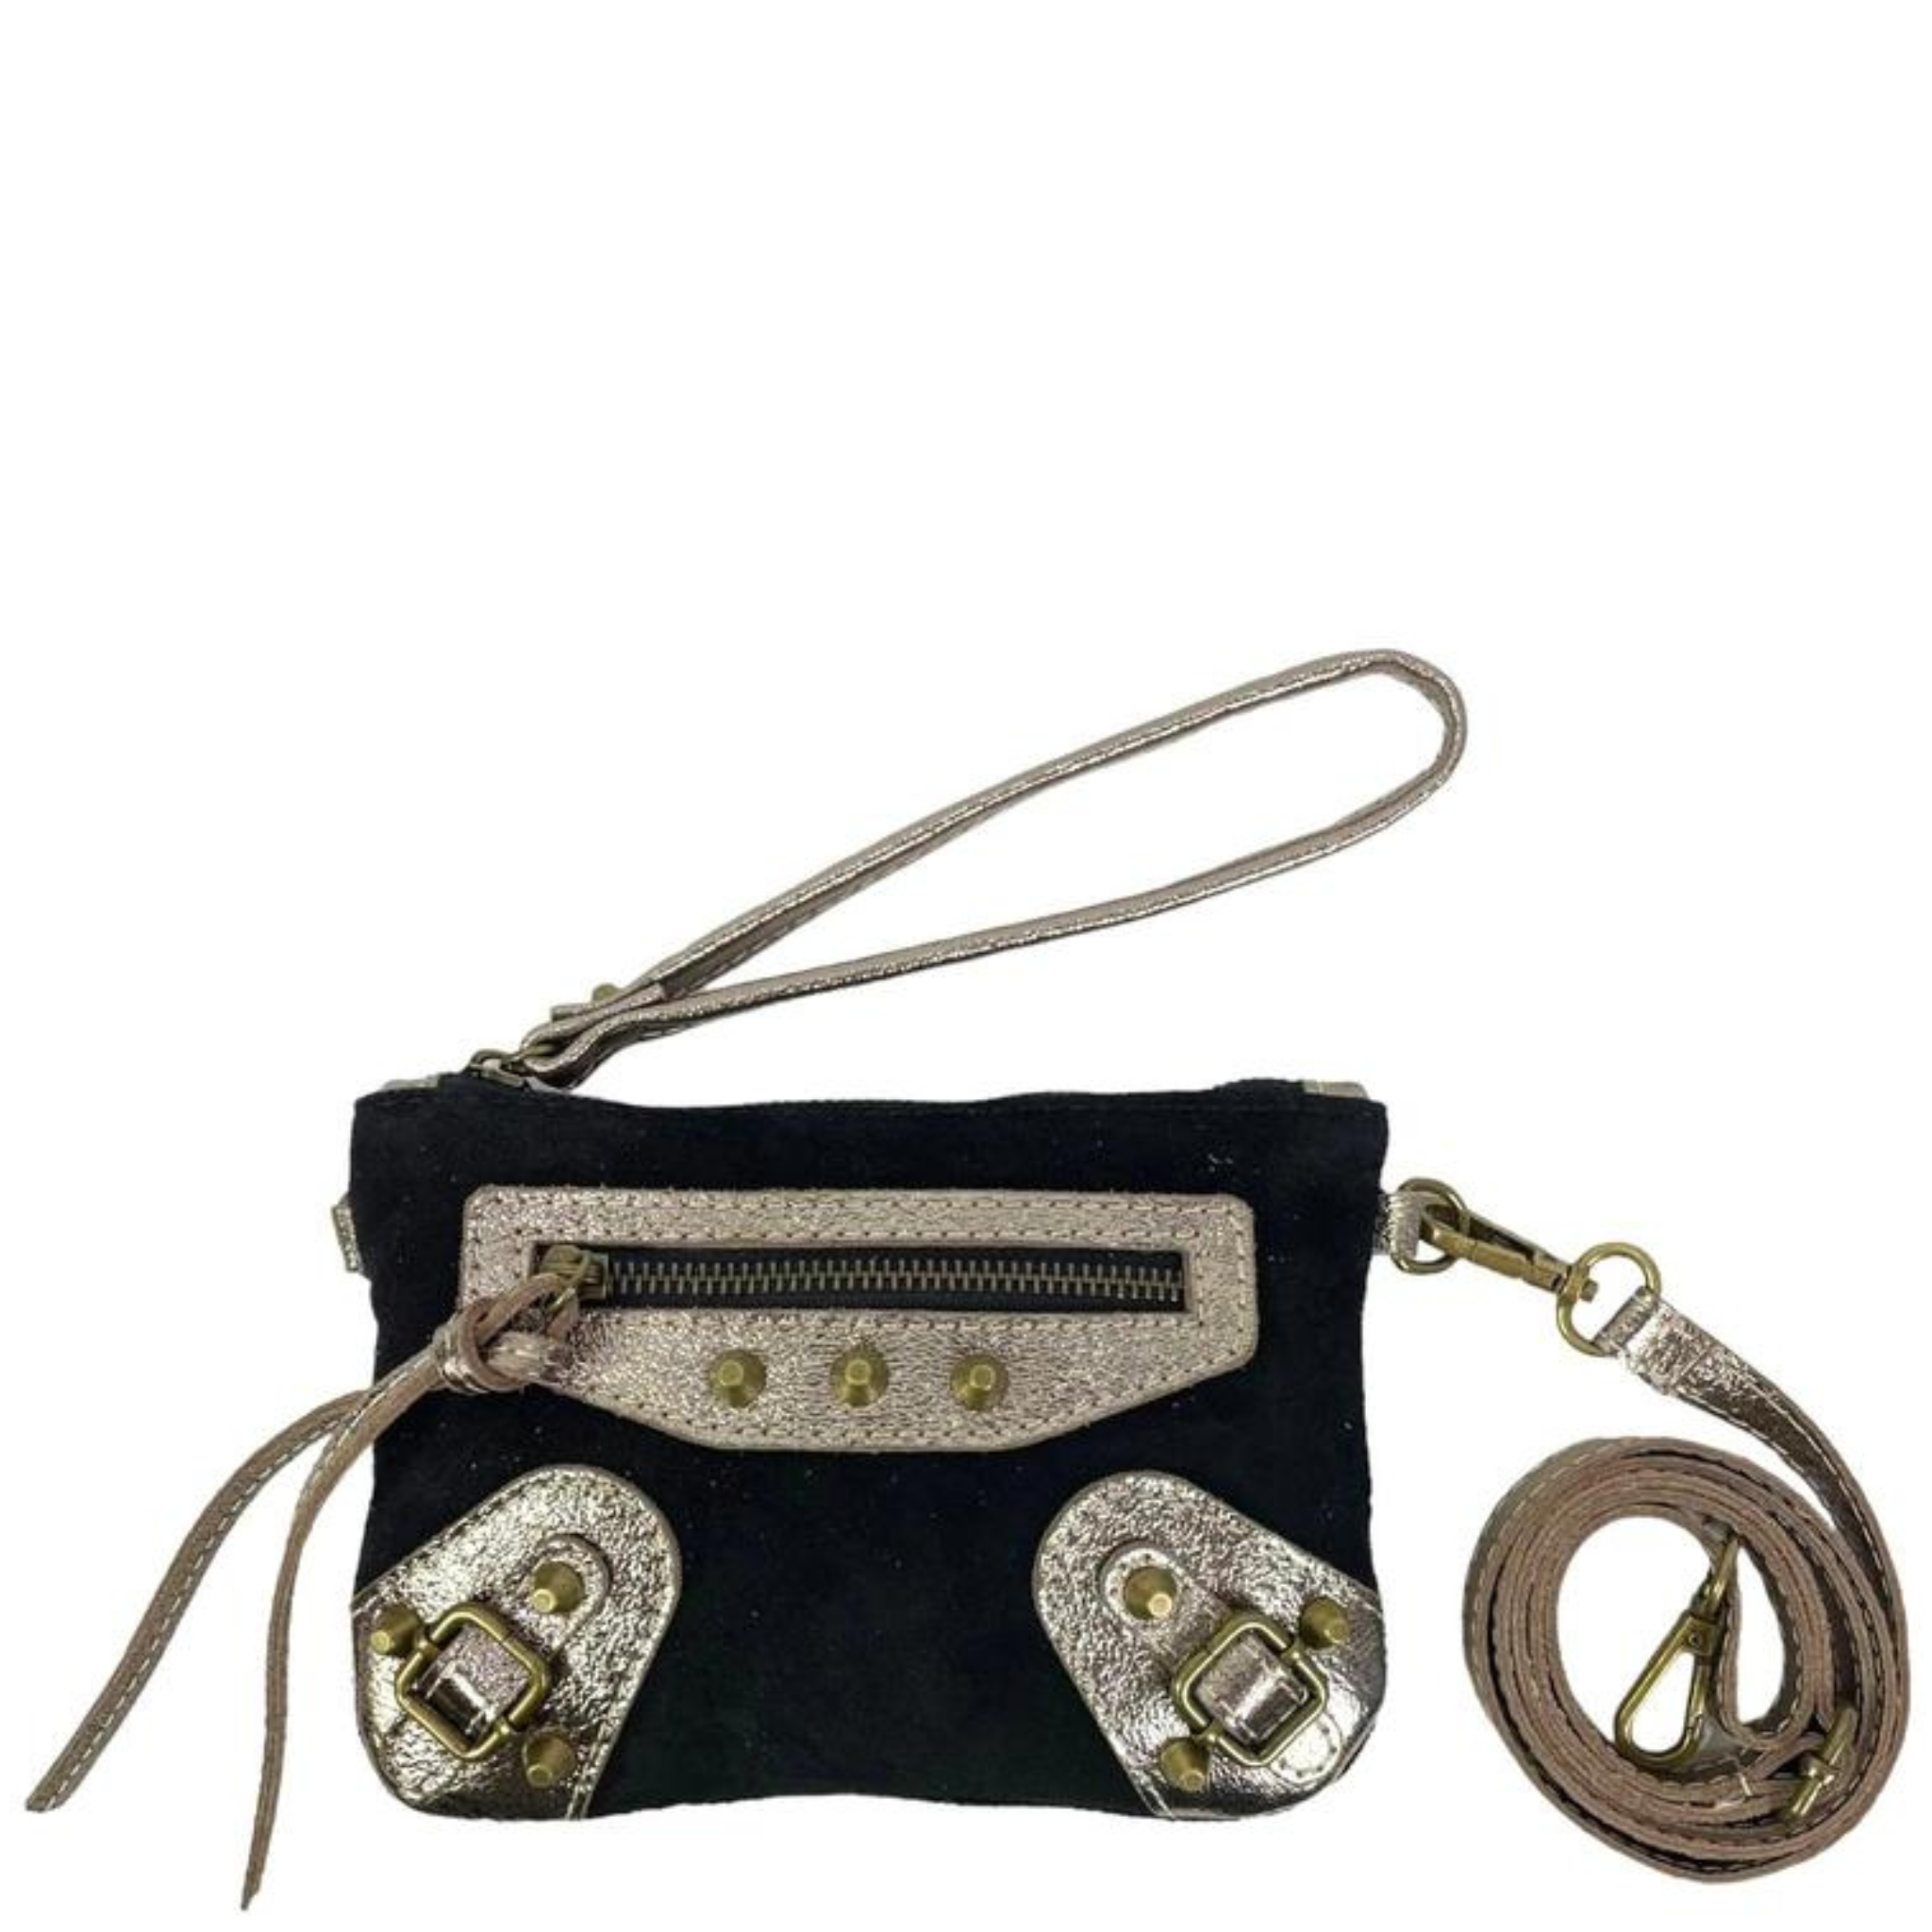 Suede Leather Wristlet with Decorative Studs